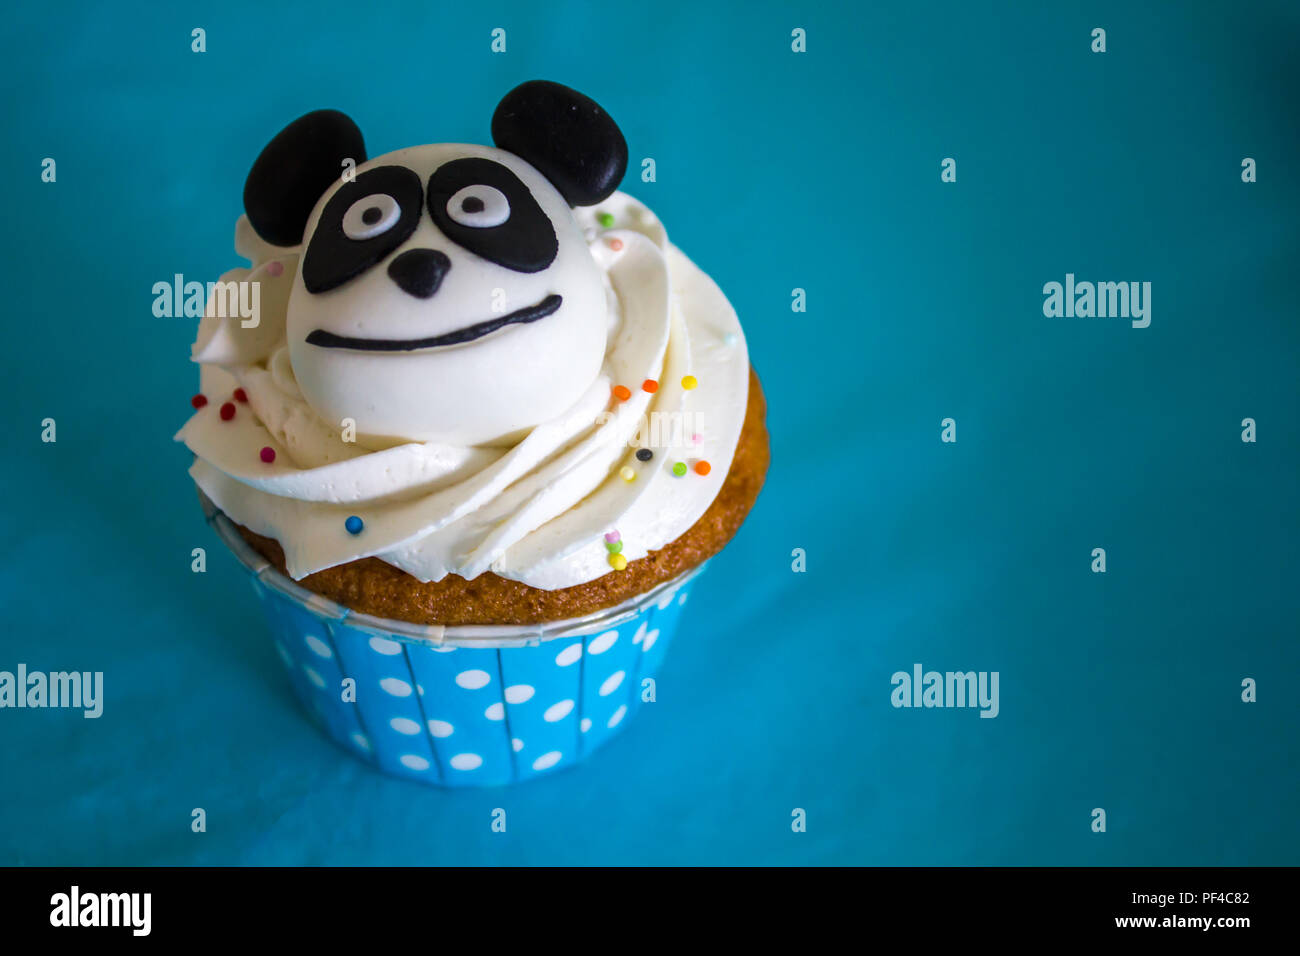 Top view of a party cupcake decorated with a panda Stock Photo